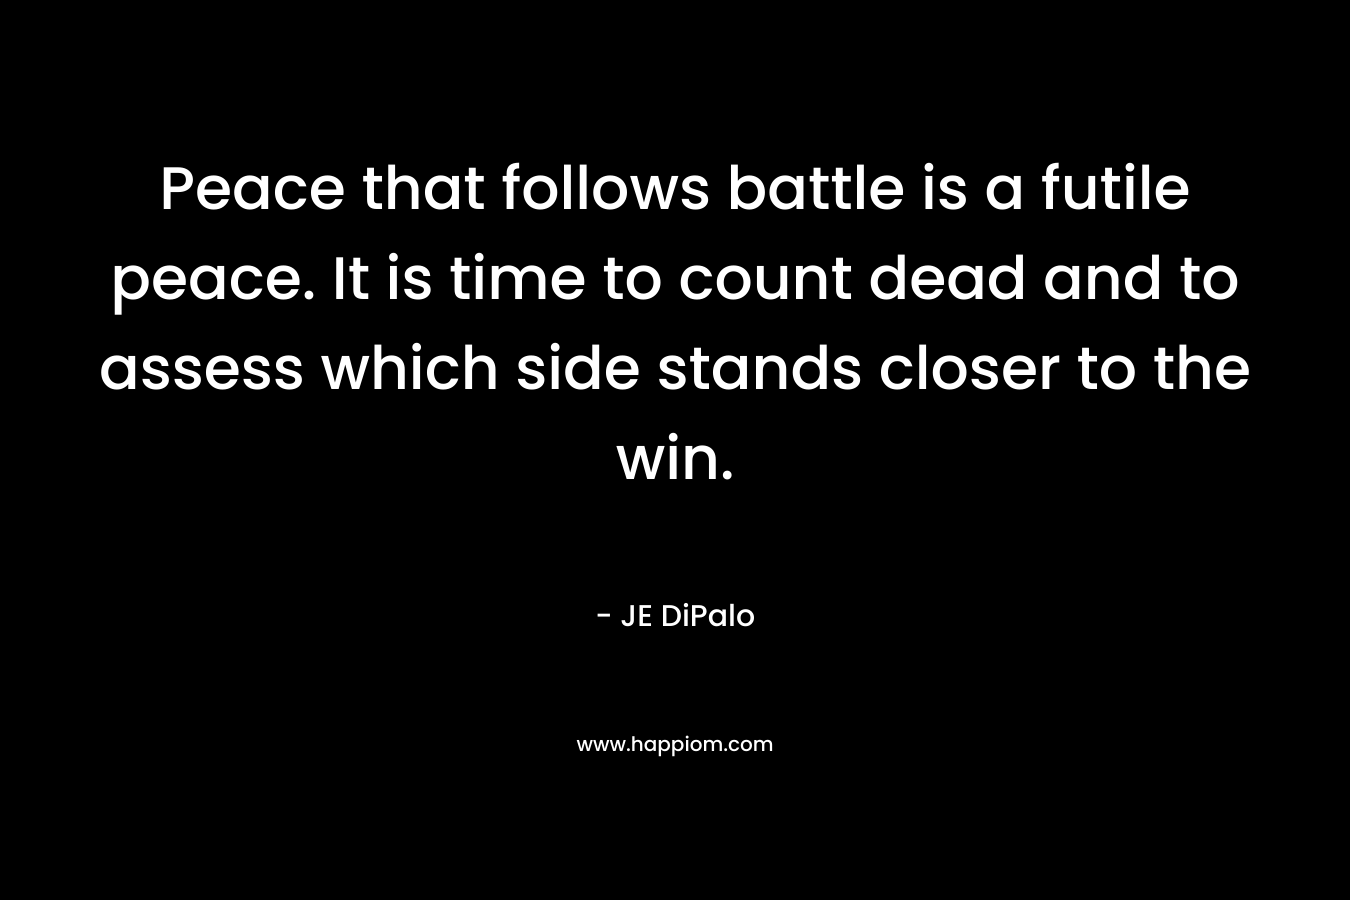 Peace that follows battle is a futile peace. It is time to count dead and to assess which side stands closer to the win. – JE DiPalo